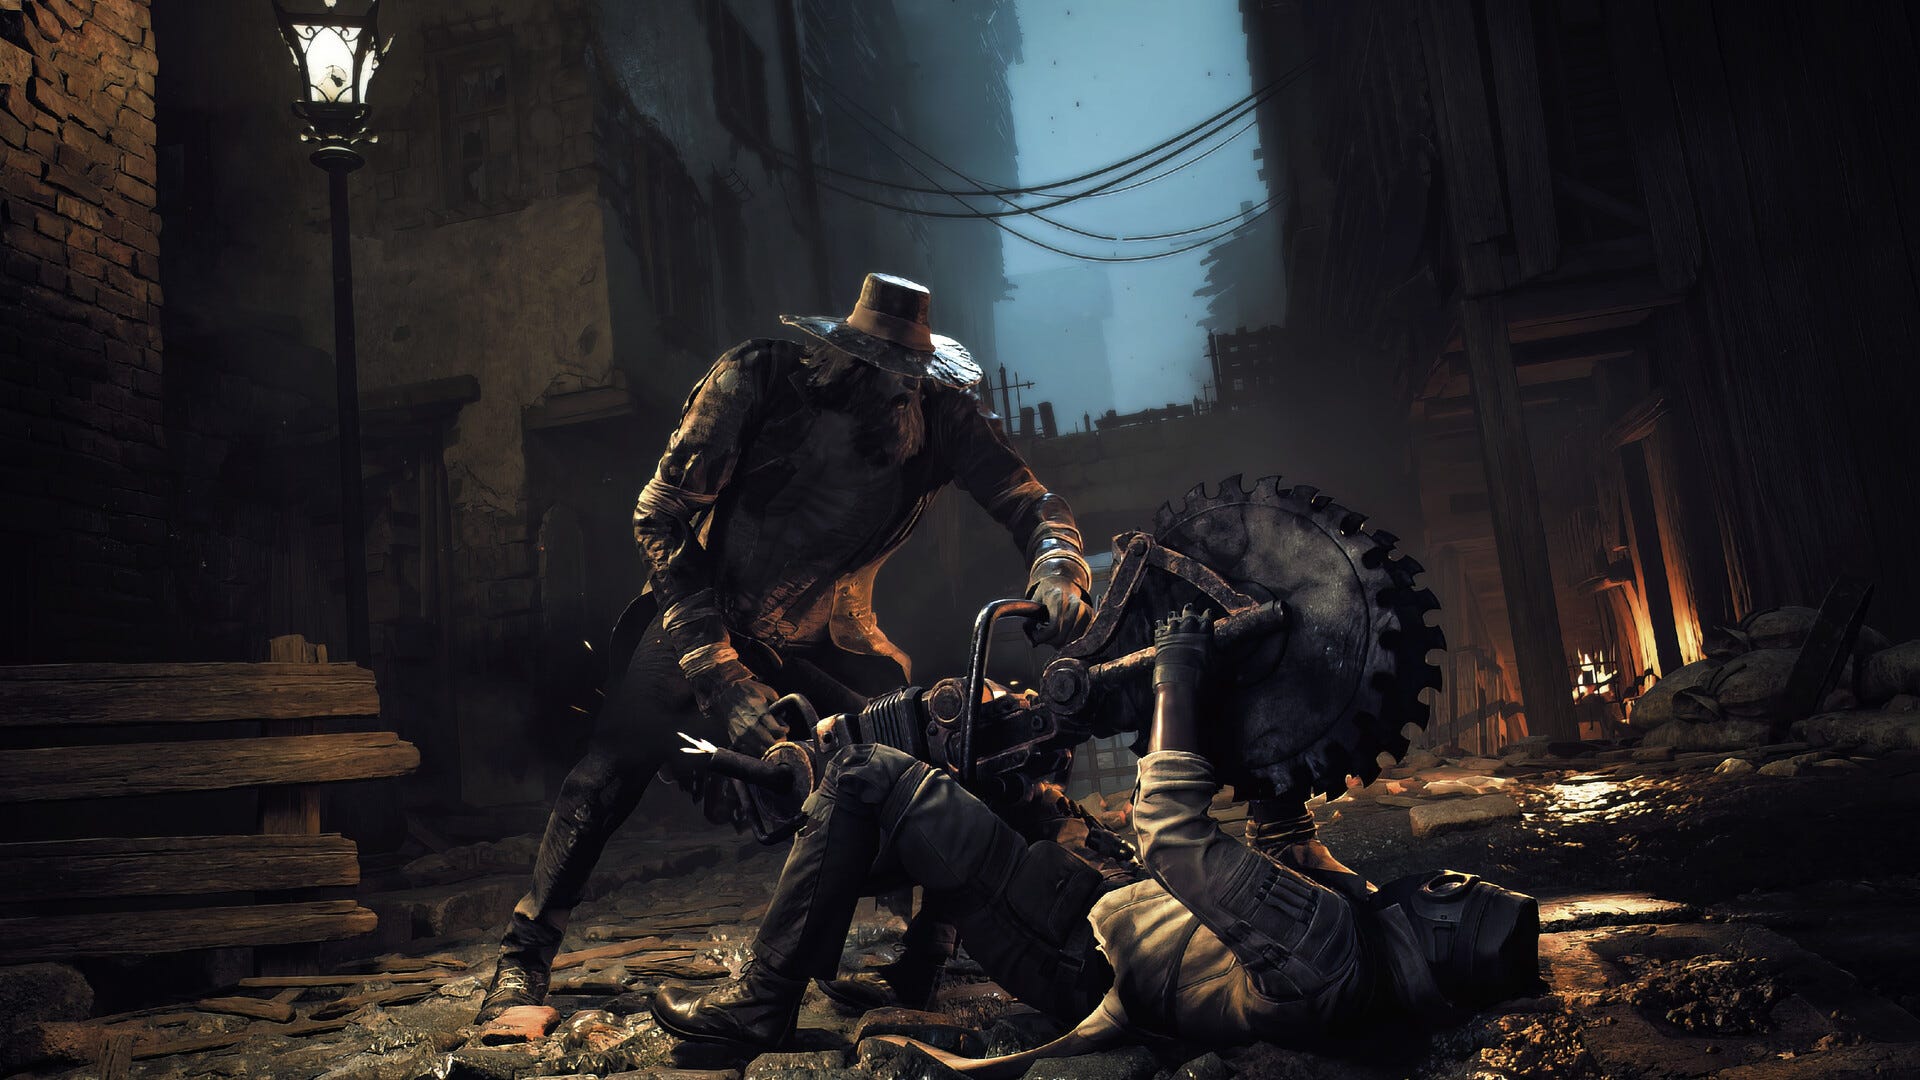 A screenshot from Remnant 2. A monster carrying a buzzsaw axe pins down a person in a gas mask.